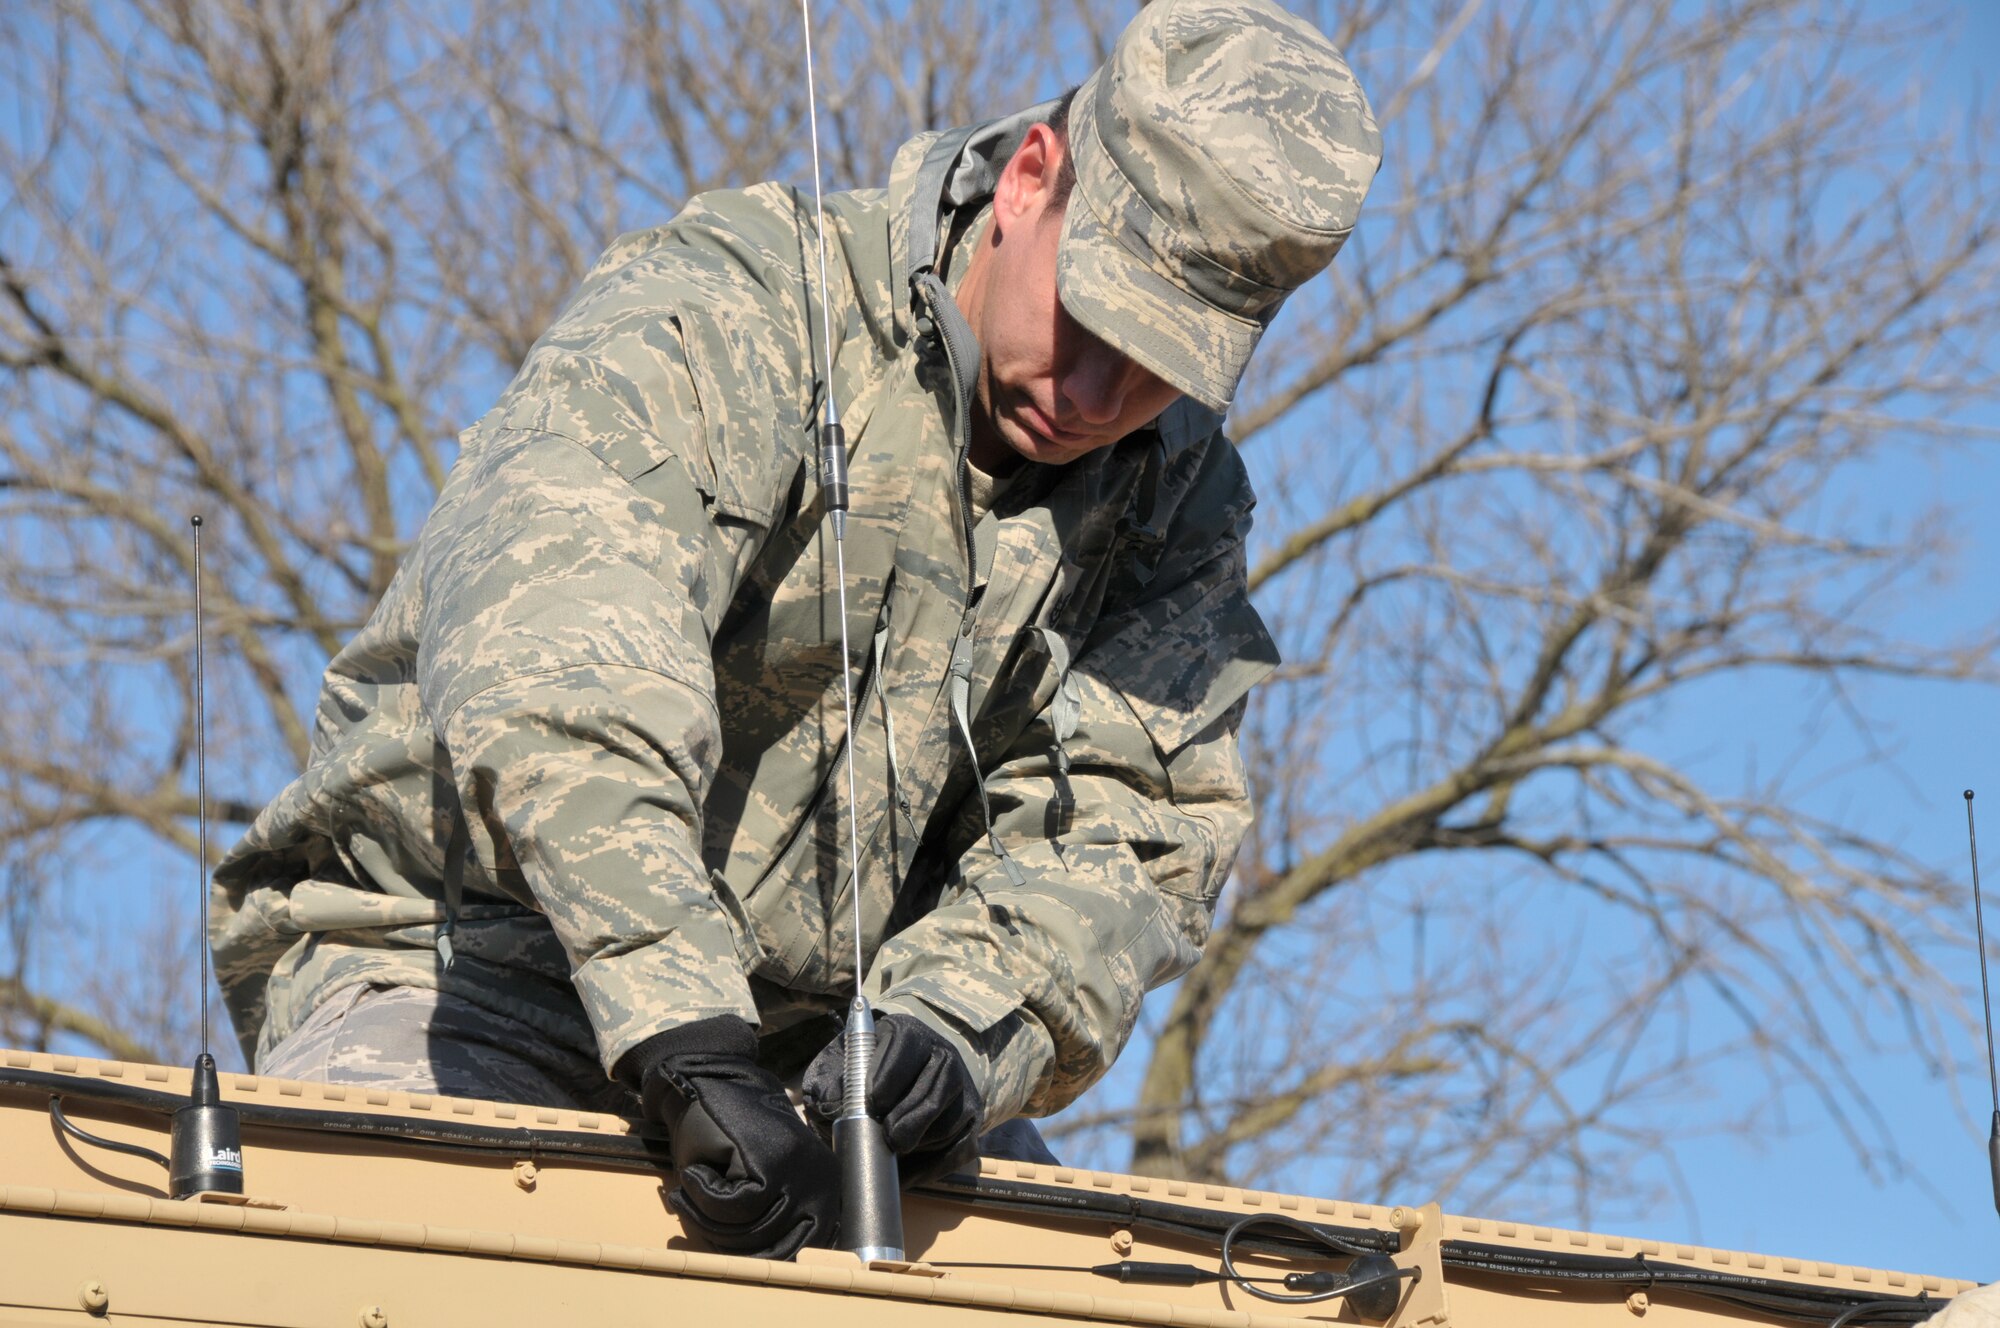 Tech. Sgt. Brent Trame, a Client System Technician with the 126th Communications Flight, attaches an exterior antenna on March 3, 2012. The antenna is part of a Contingency Response Communications System (CRCS). The CRCS is an internet based solution that allows first responders to communicate and exchange information by radio, live streaming video, wireless internet and voice over IP services. It provides highly mobile critical communications services to local, state and federal first responders with a simple to operate solution that bridges the gap between first responder agencies and various levels of command and control.The CRCS is a vehicle mounted, rapidly deployable asset that requires only two personnel and can be operational within 30 minutes of arriving on site. The 126th Air Refueling Wing, Illinois Air National Guard, can provide communications as well as other vital services in the aftermath of a natural disaster or other emergency. (National Guard photo by Master Sgt. Franklin Hayes) 